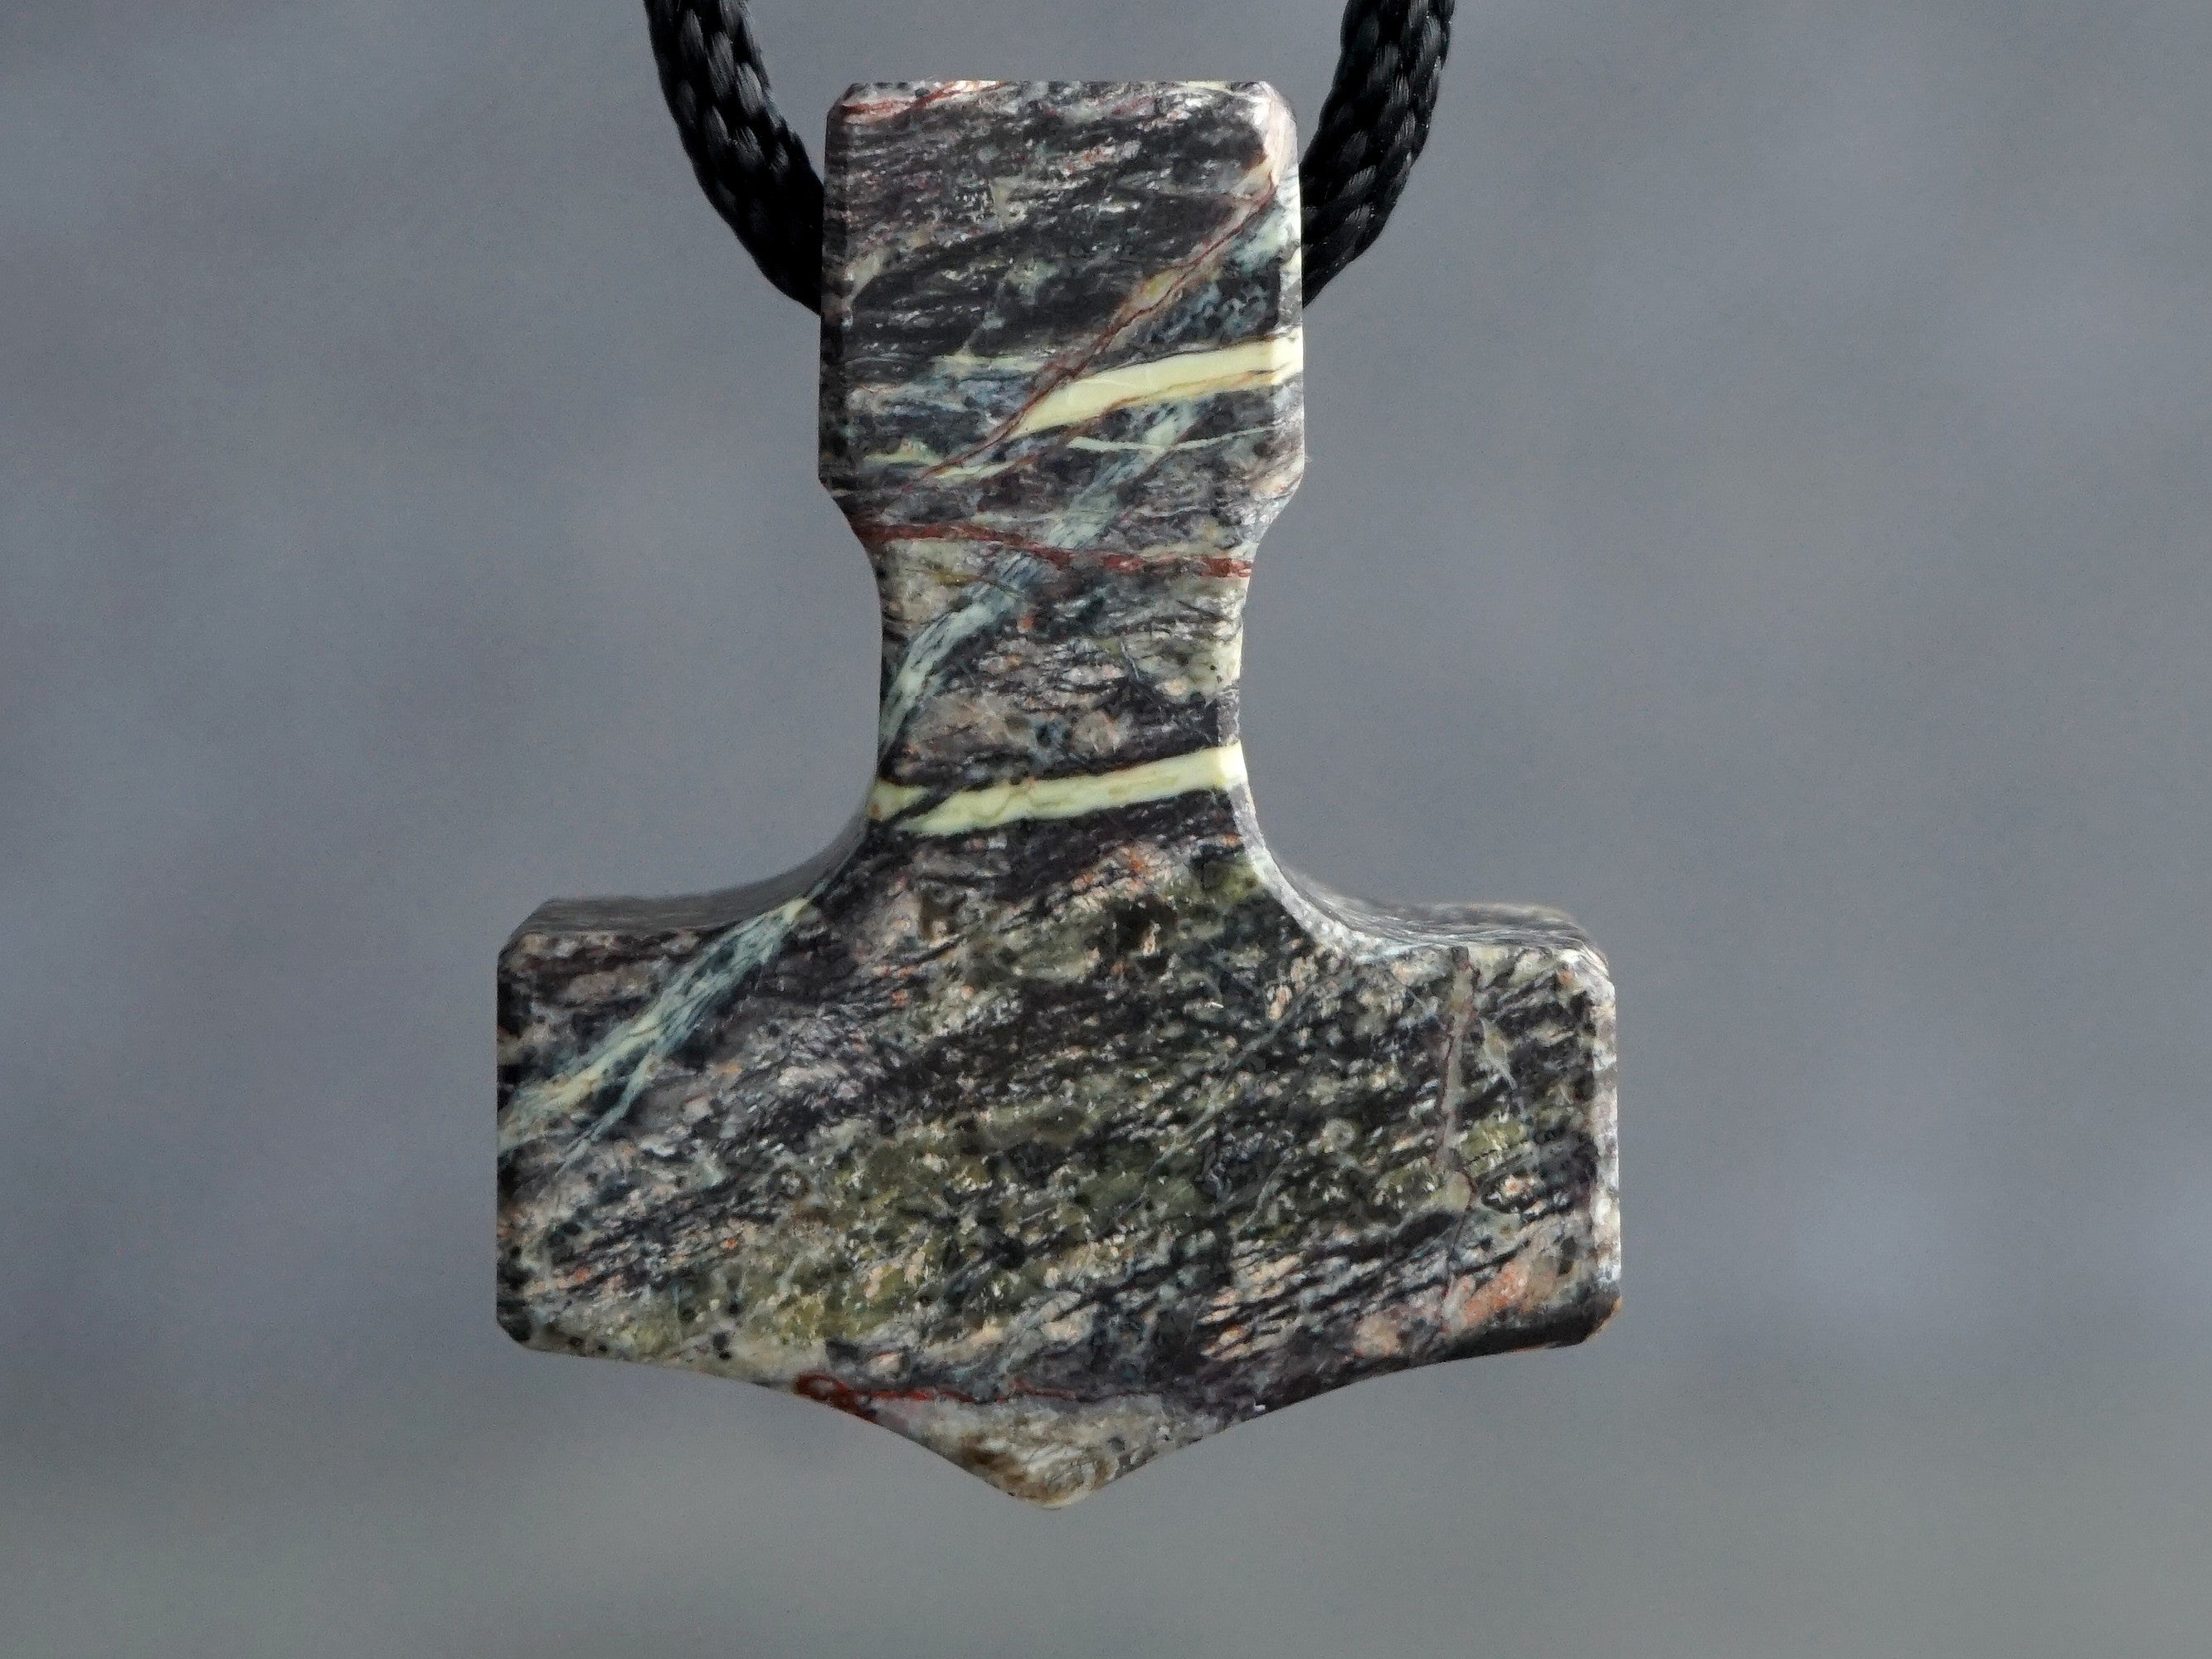 Thor's hammer carved out of multicolored Serpentine stone